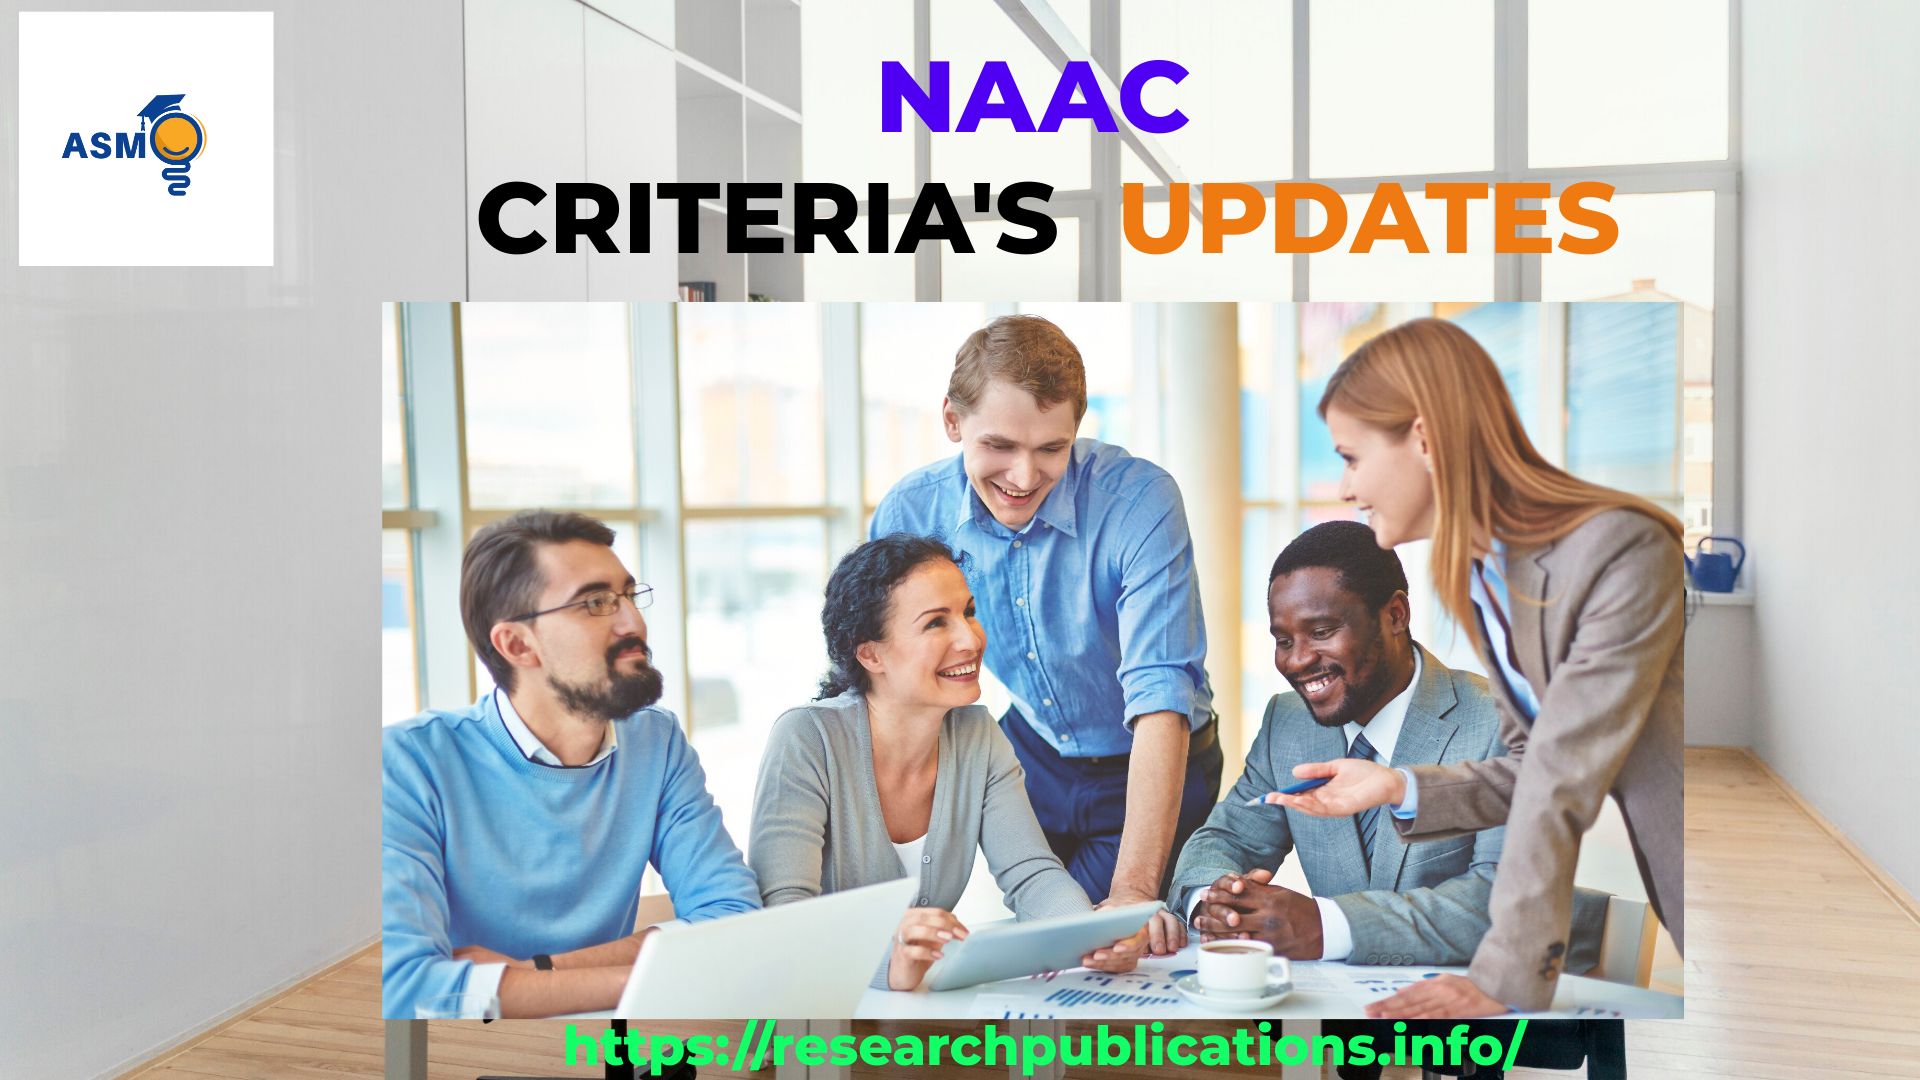 National Assessment and Accreditation Council (NAAC), Curricular Aspects Teaching-Learning and Evaluation Research, Consultancy and Extension, Infrastructure and Learning, Resources Student Support and Progression Governance, Leadership and Management, Institutional Values and Social Responsibilities